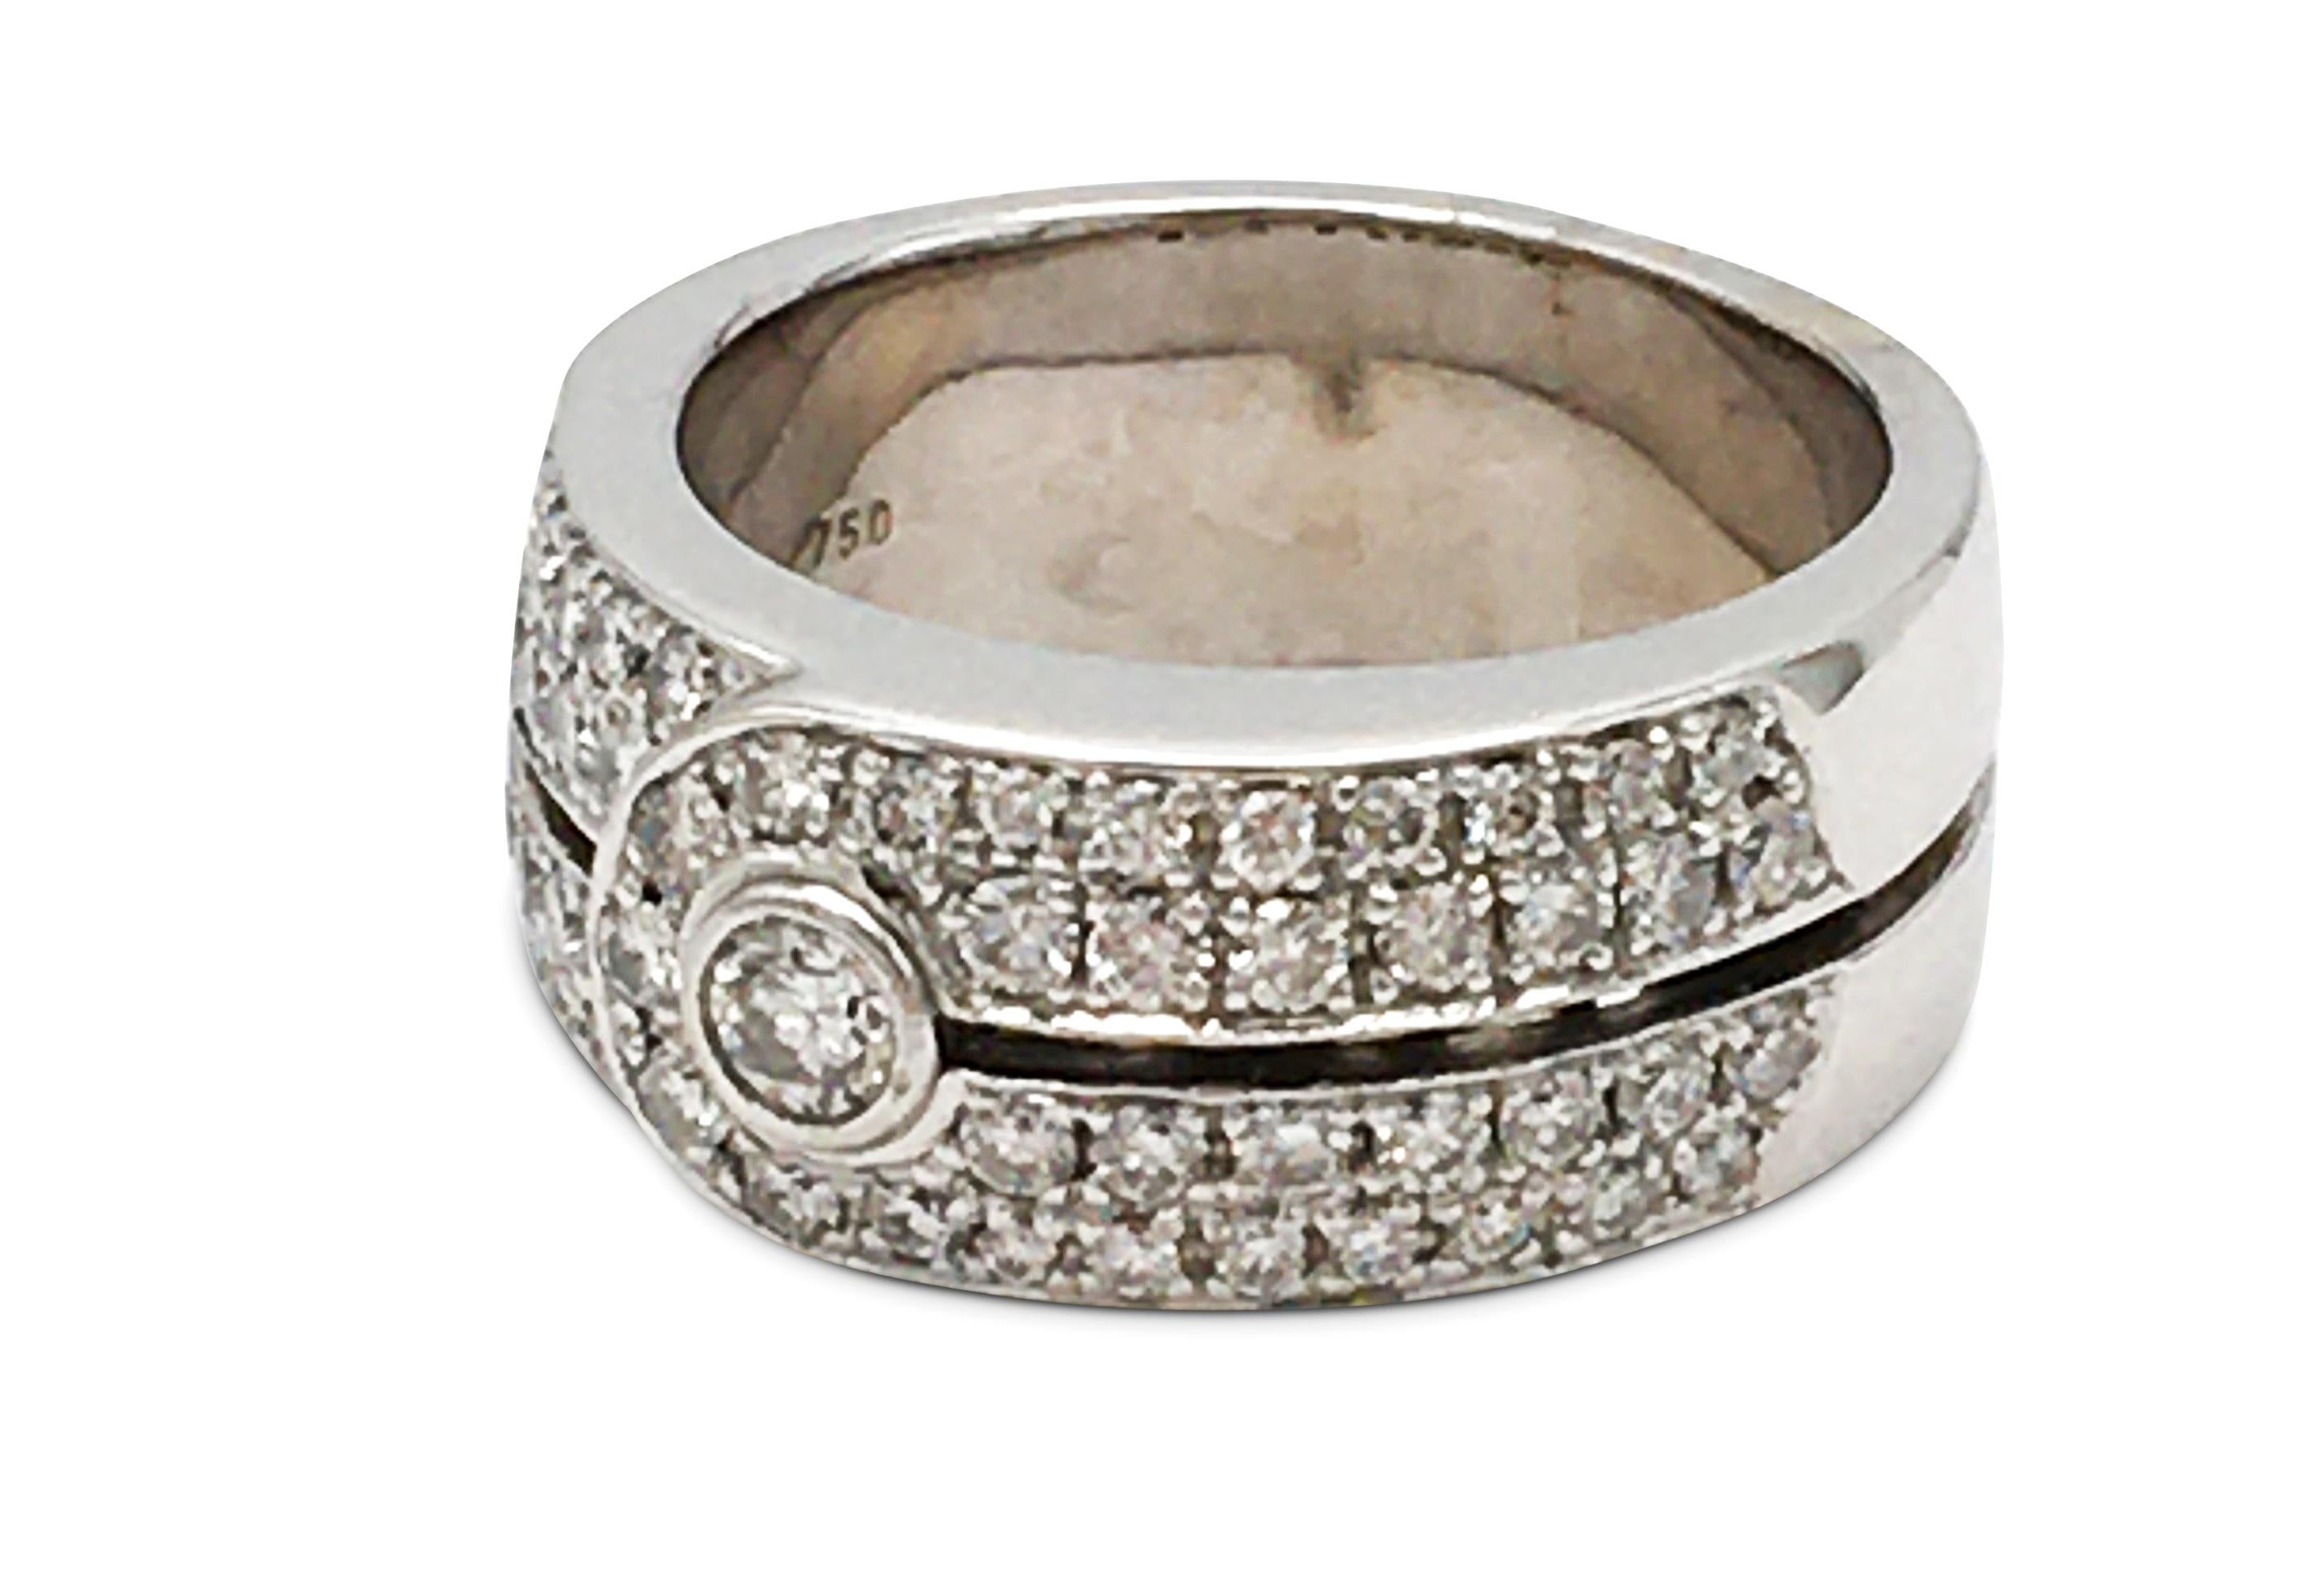 Authentic Di Modolo ring crafted in 18 karat white gold and set with an estimated 1.0 carats of high-quality round brilliant cut diamonds. Signed Di Modolo, 750. Ring size 6. The ring is not presented with the original box or papers. CIRCA 2000s.